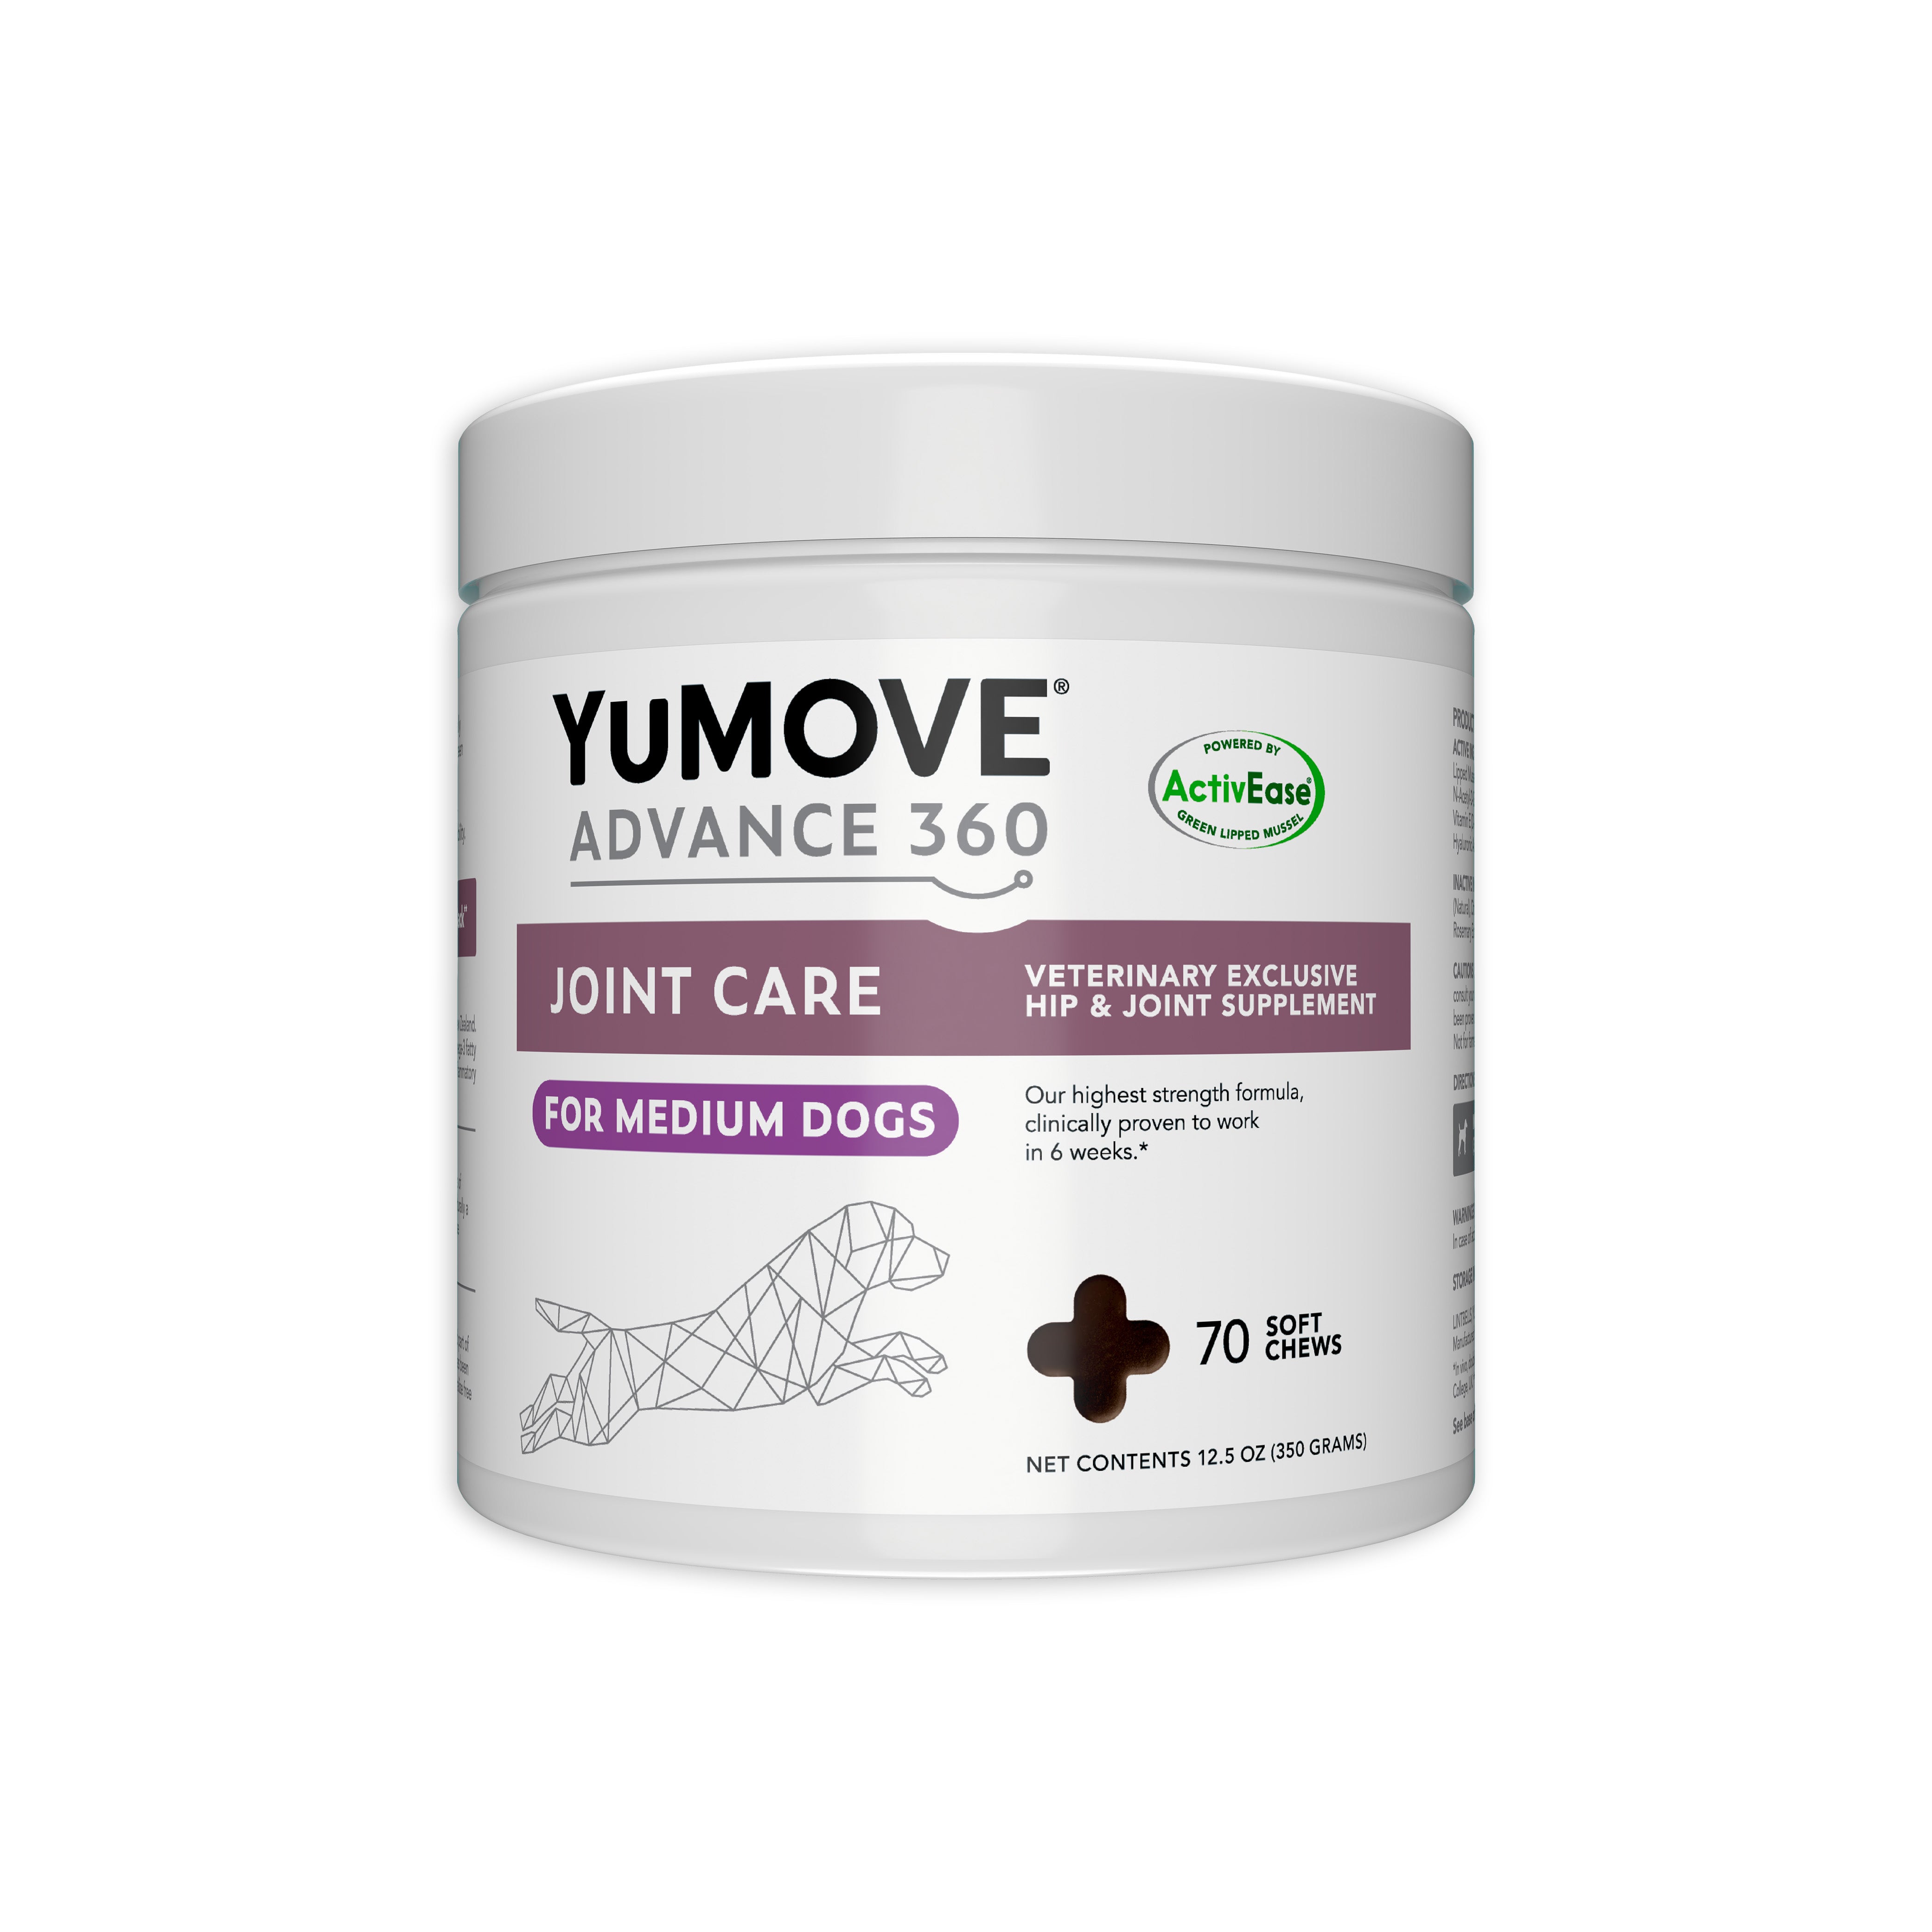 A container of YUMOVE ADVANCE 360 Joint Care for Medium Dogs, with a wireframe dog illustration, labeled as a veterinary exclusive hip & joint supplement, and indicating 70 soft chews, net contents 12.5 oz (350g).